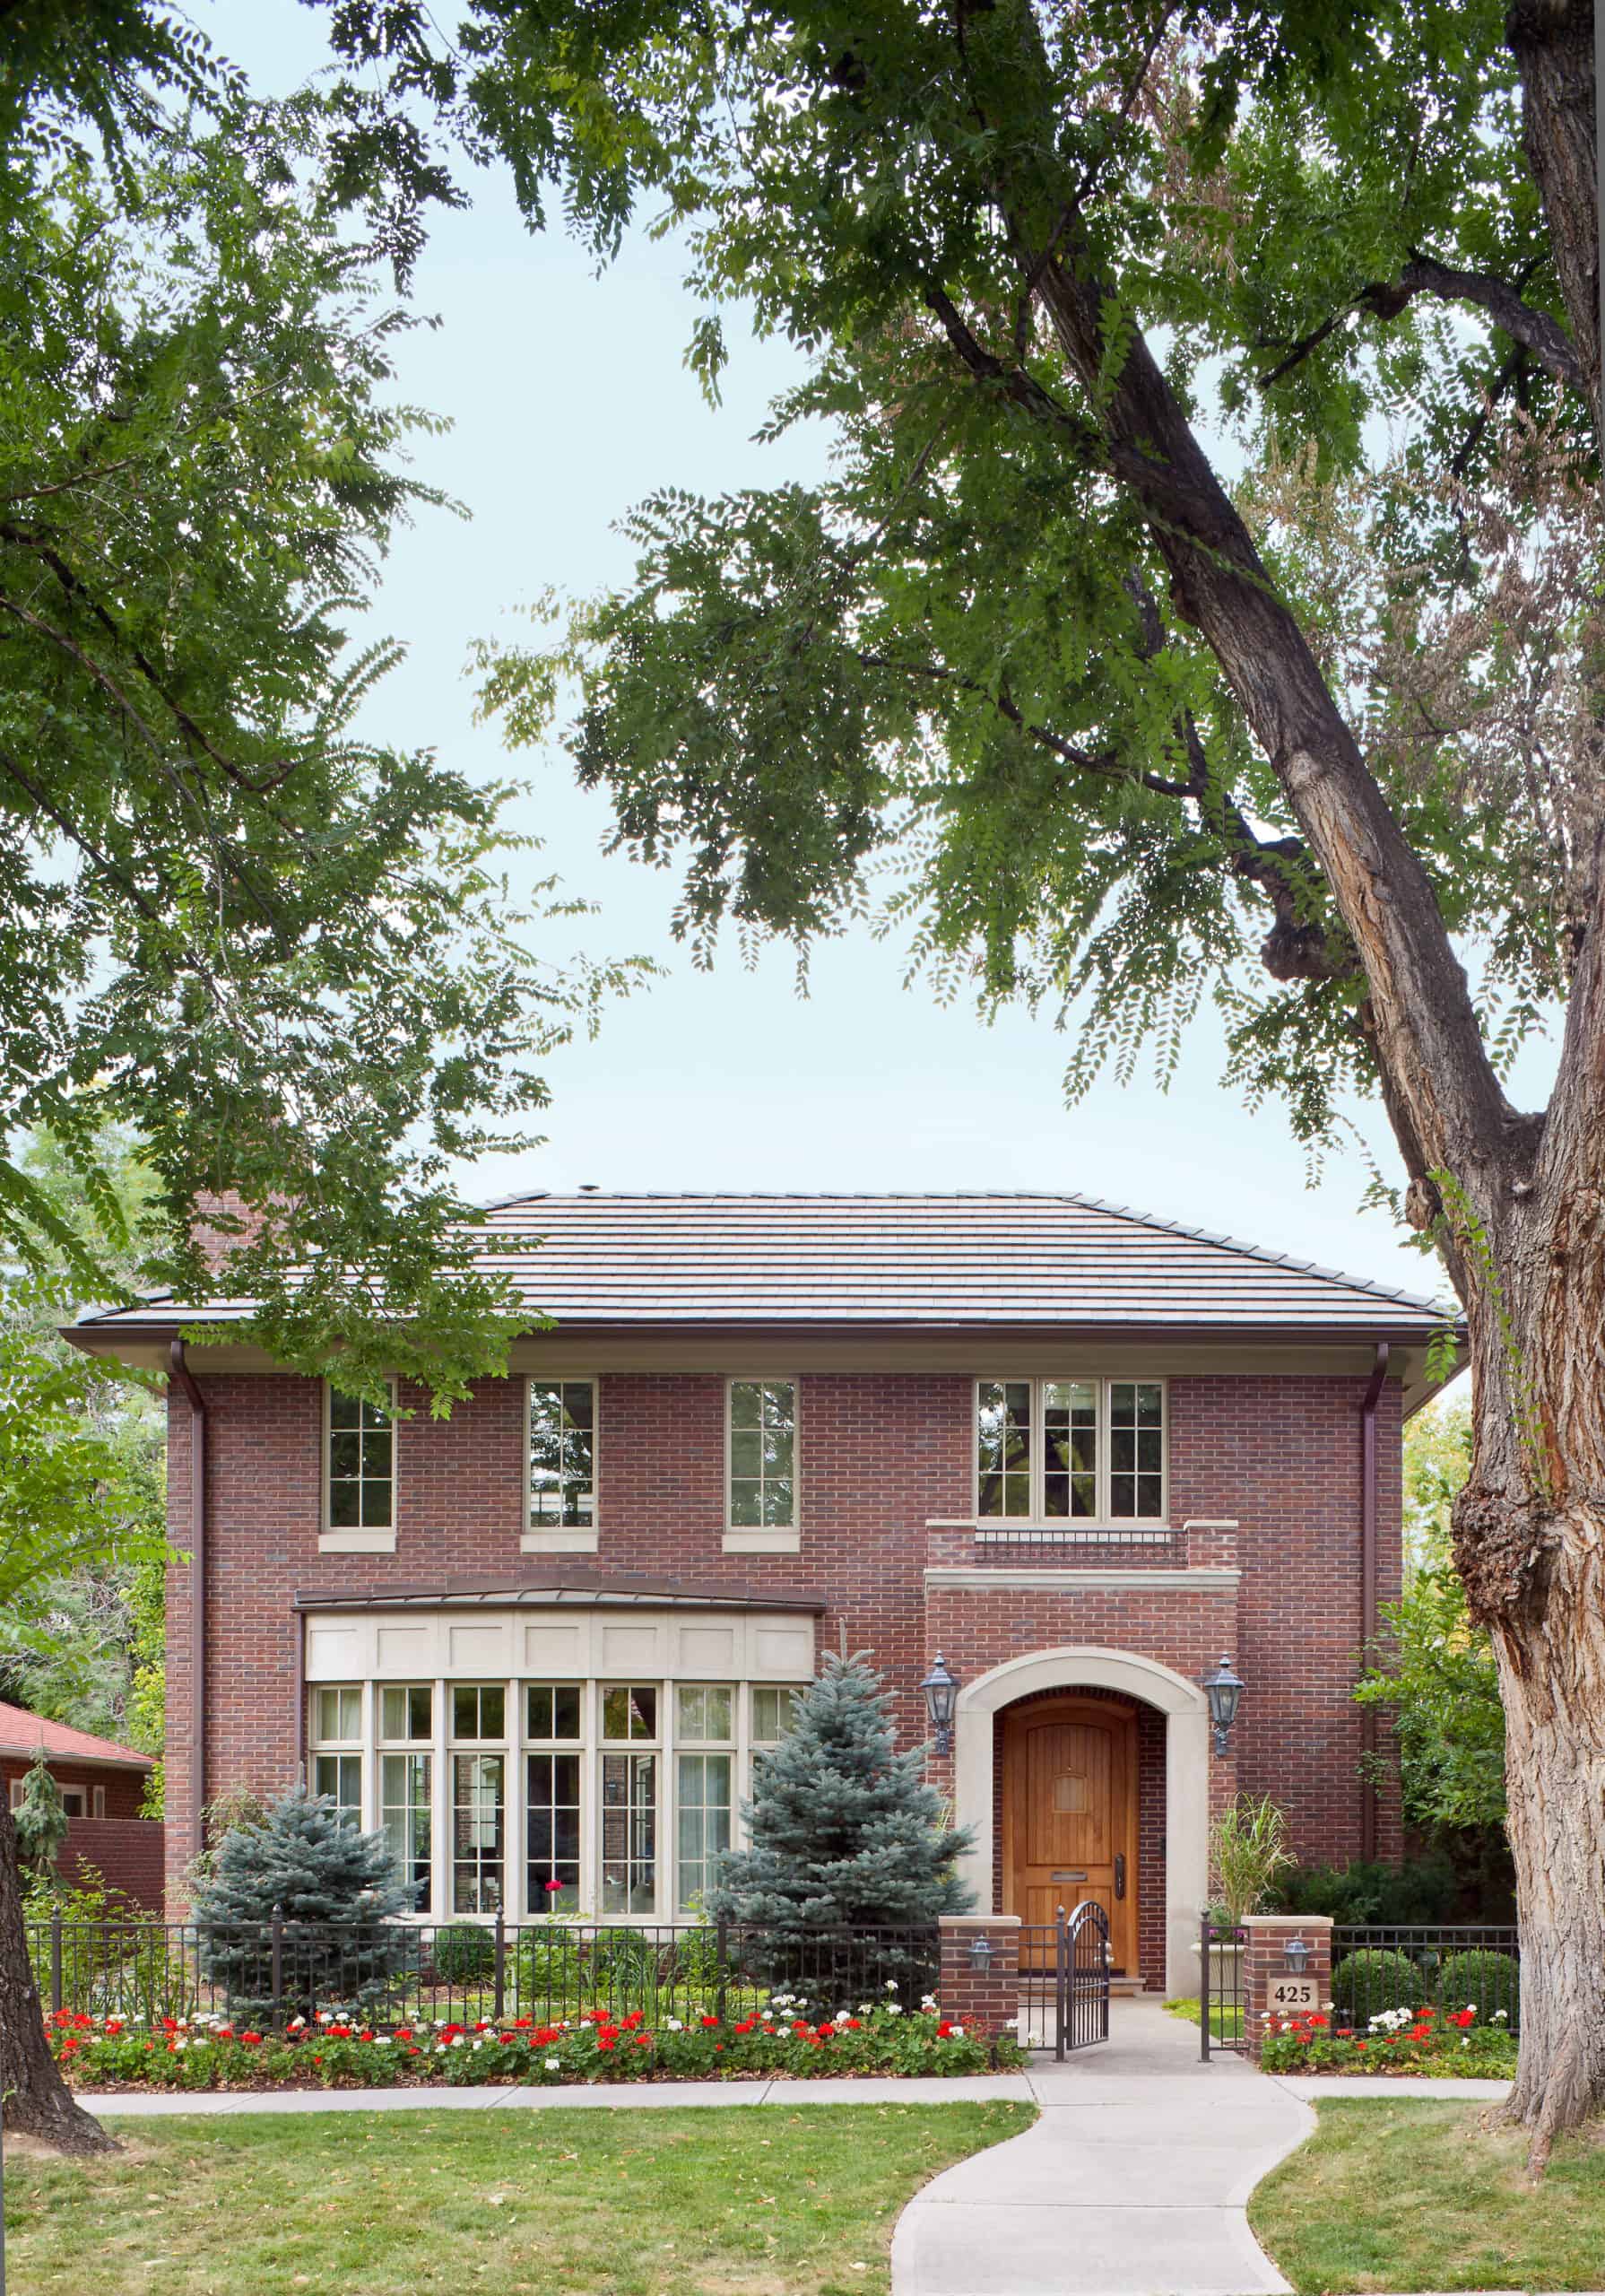 Traditional two story brick home remodel transformation